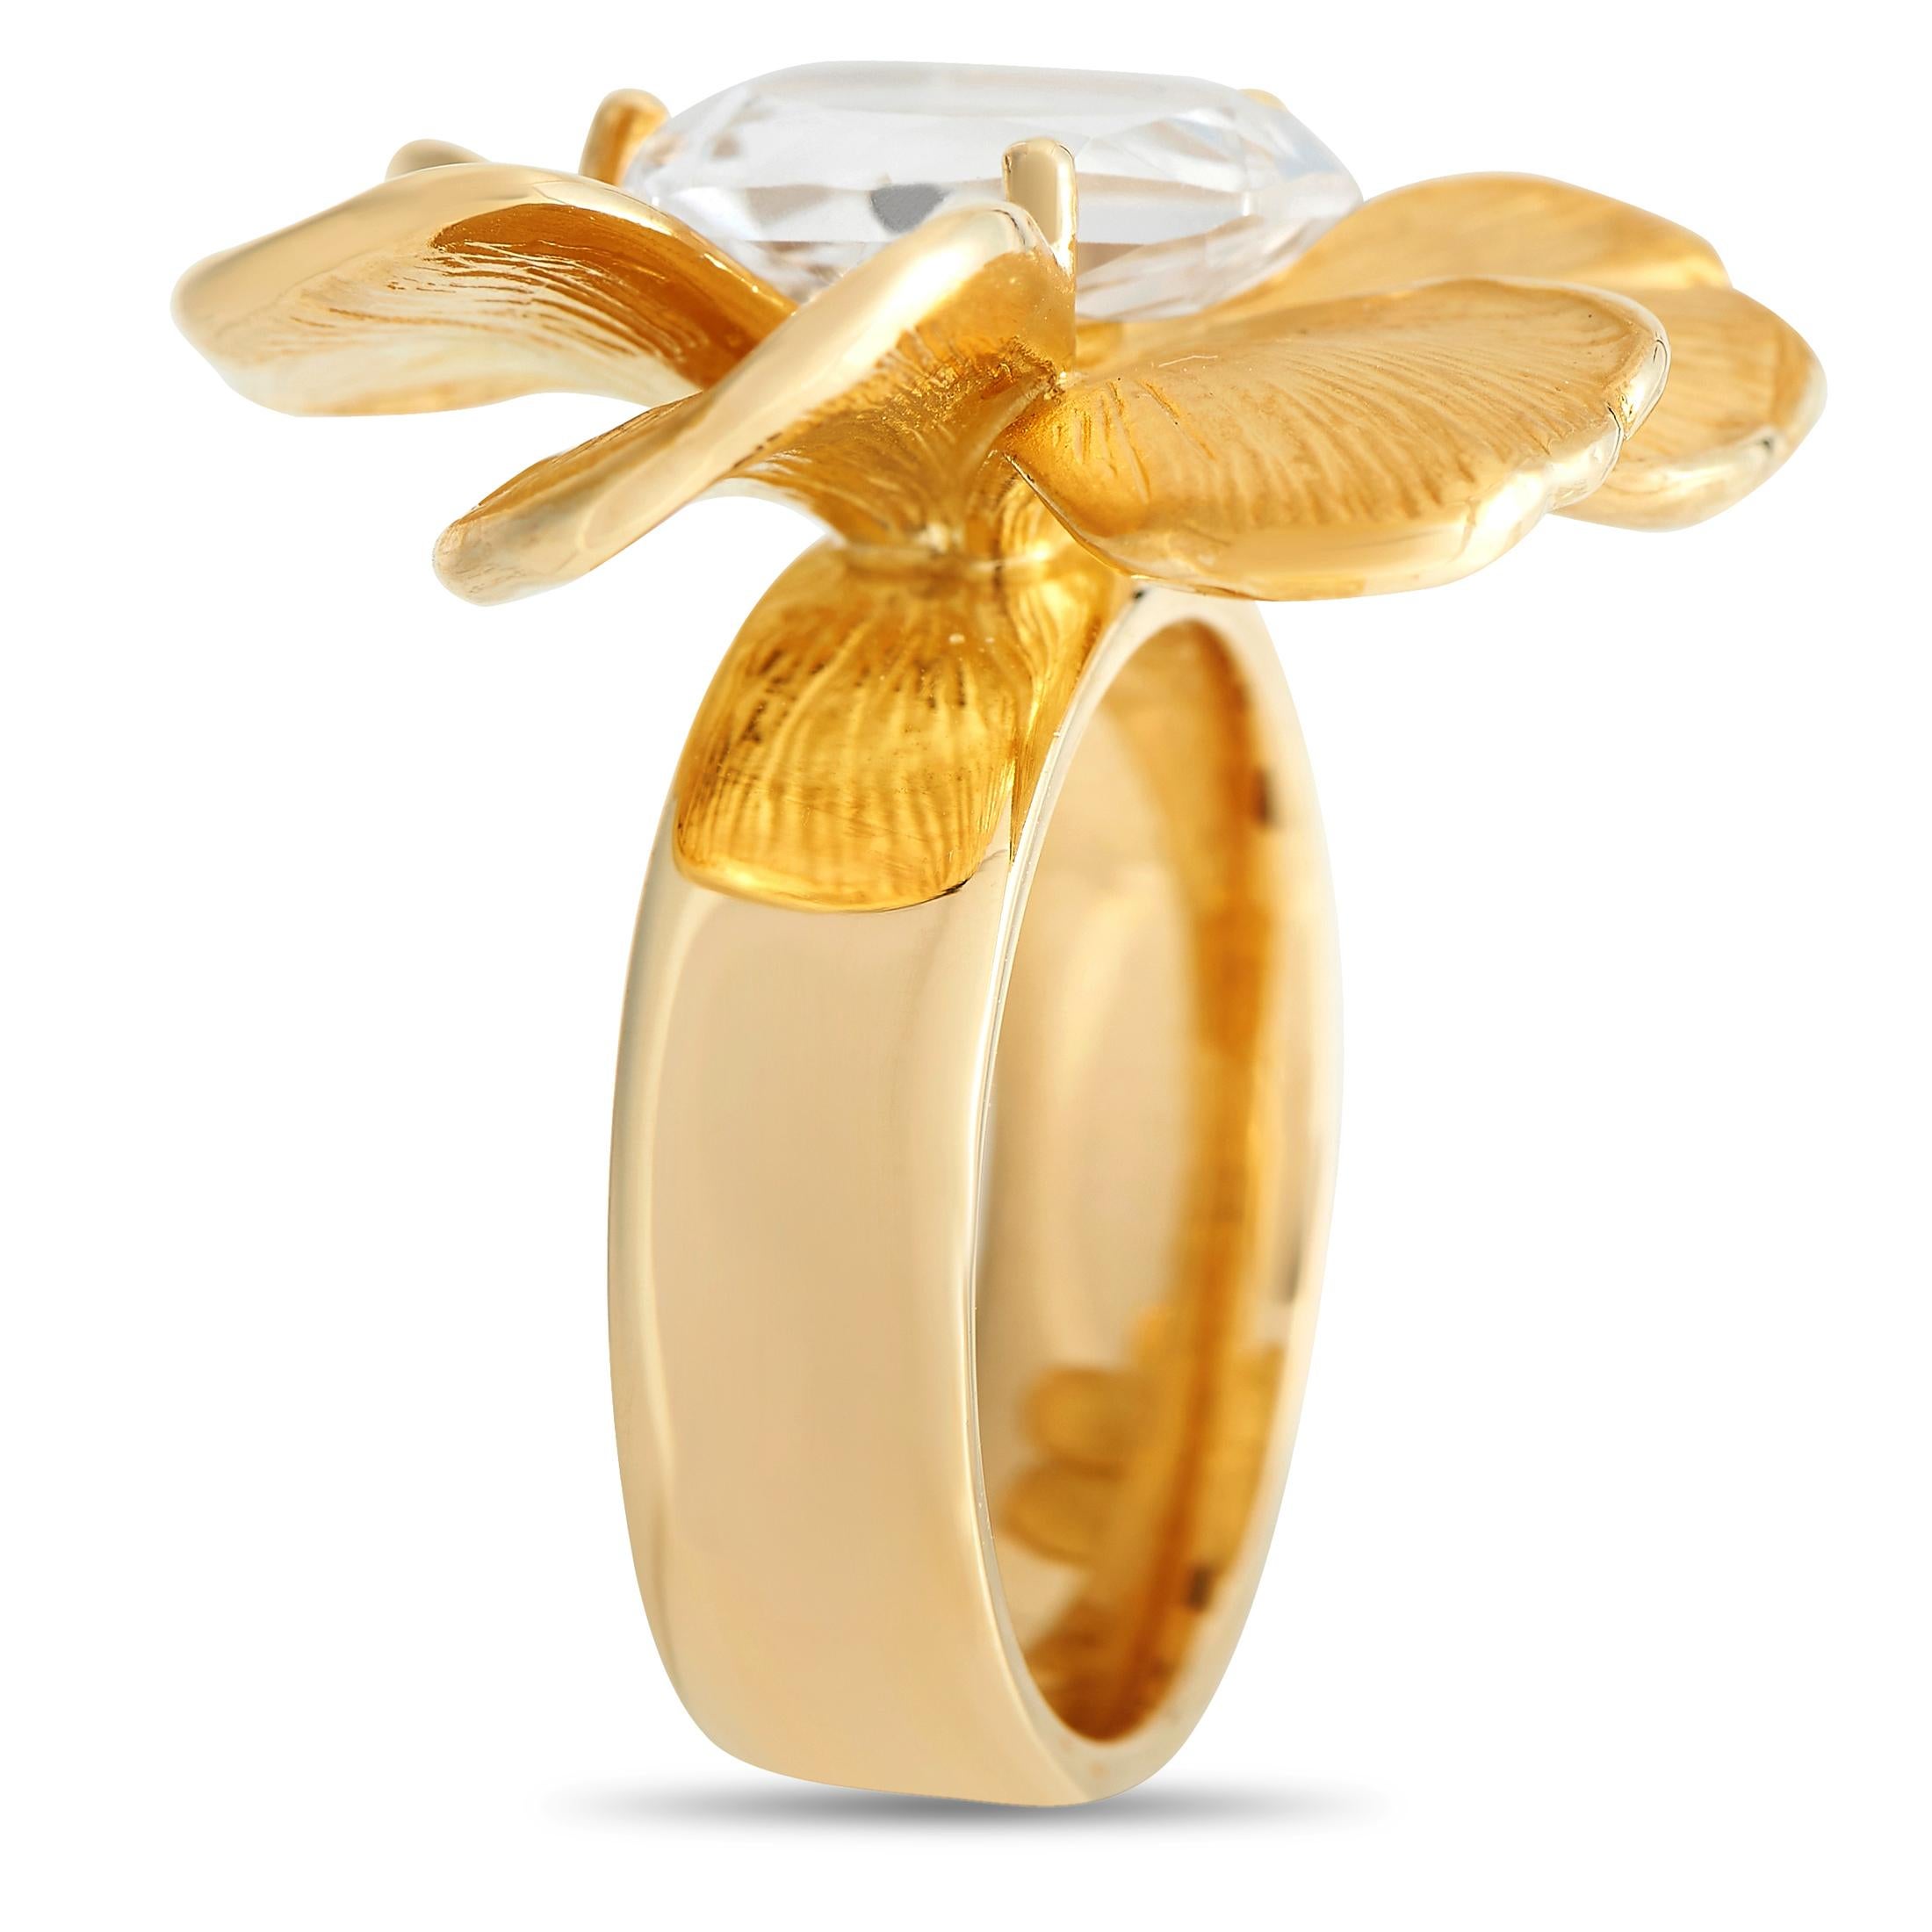 Plucked from the Gardenias Collection of Carrera y Carrrera is this 18K yellow gold ring oozing with sculptural glamour. The 5mm thick band in polished finish is topped with a floral centerpiece made up of six textured petals with polished edges.